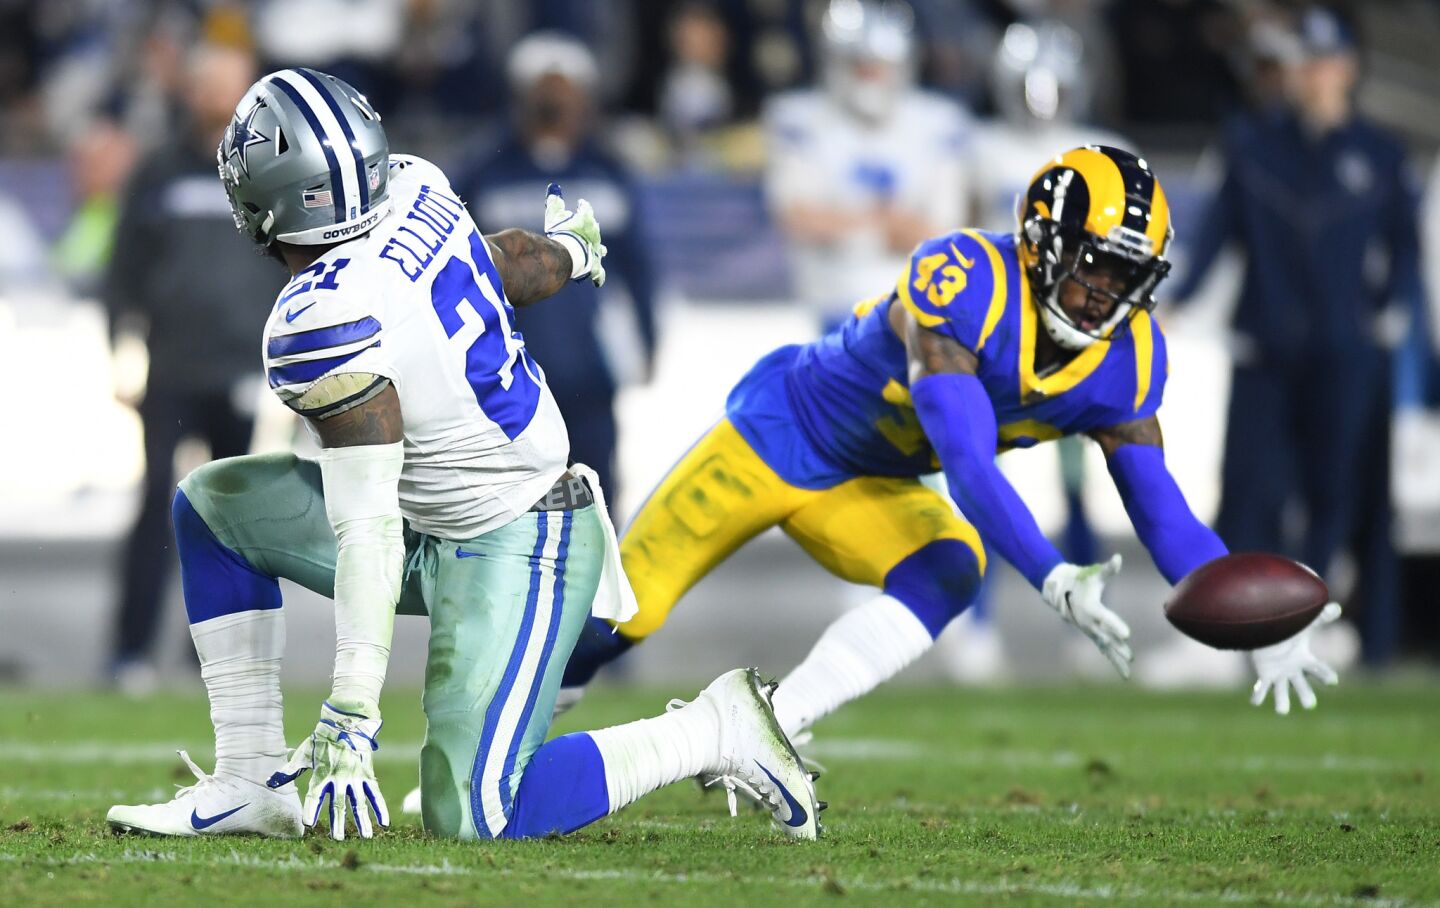 Rams safety John Johnson almost comes up with an interception on a pass intended for Cowboys running back Ezekiel Elliott.